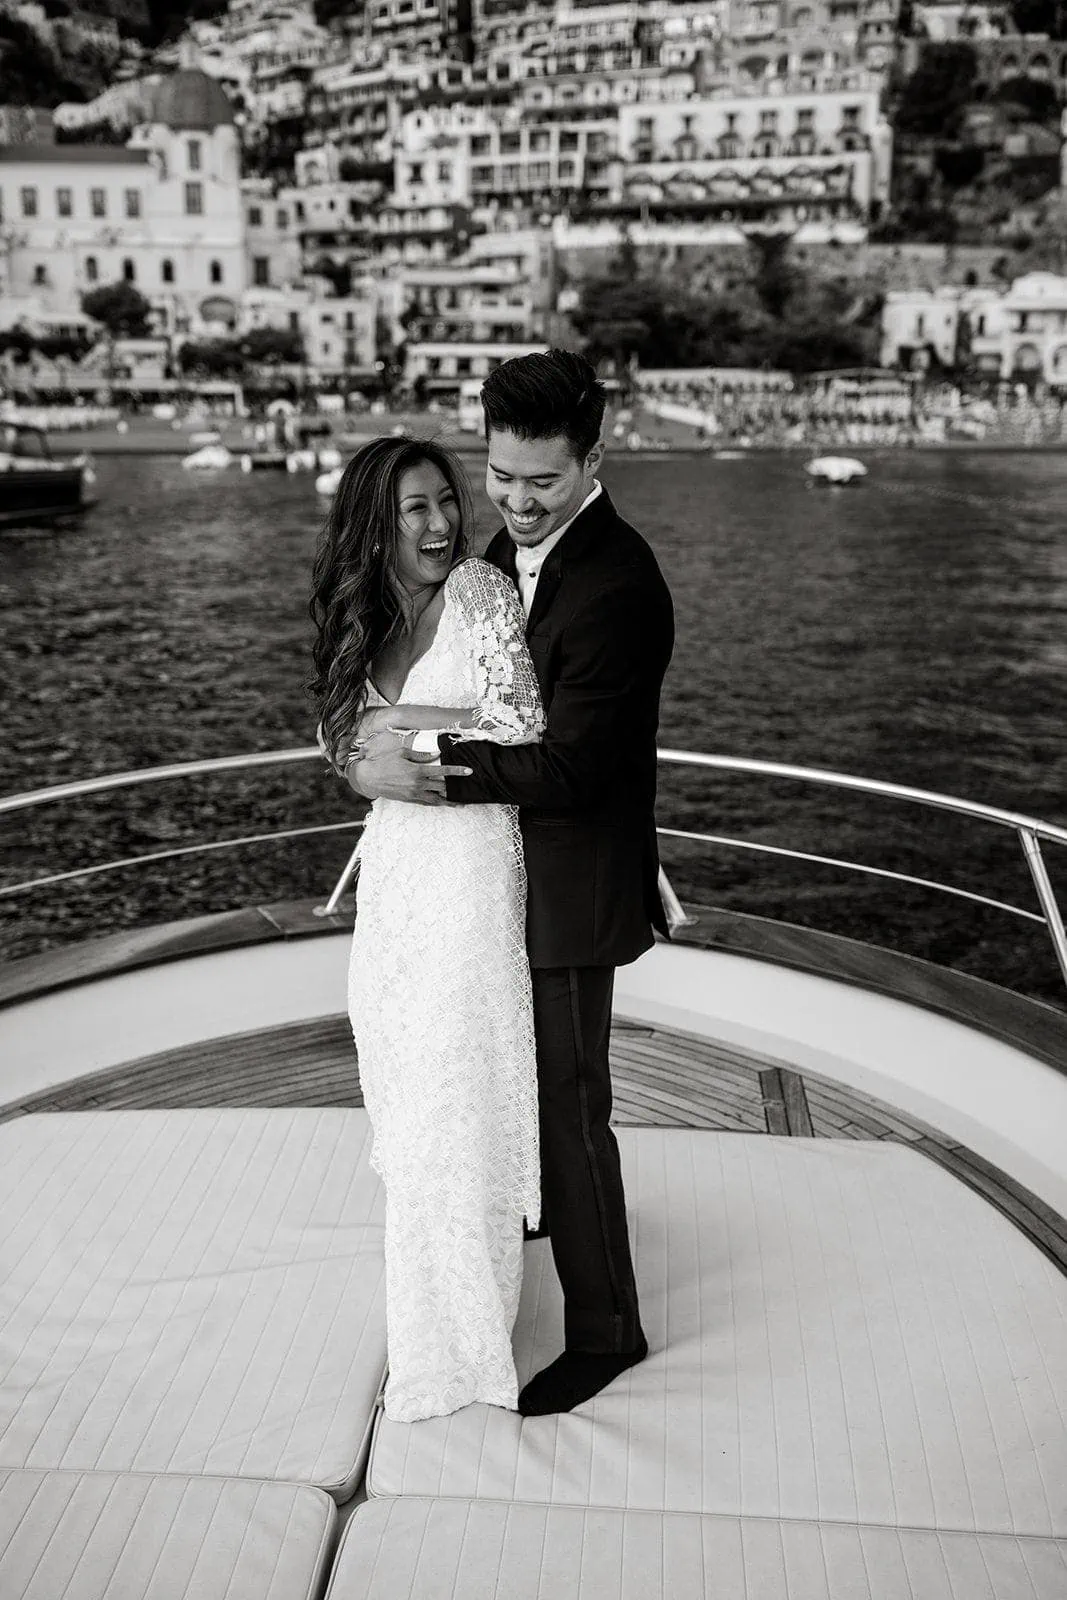 Married couple embrace on boat in Positano Italy